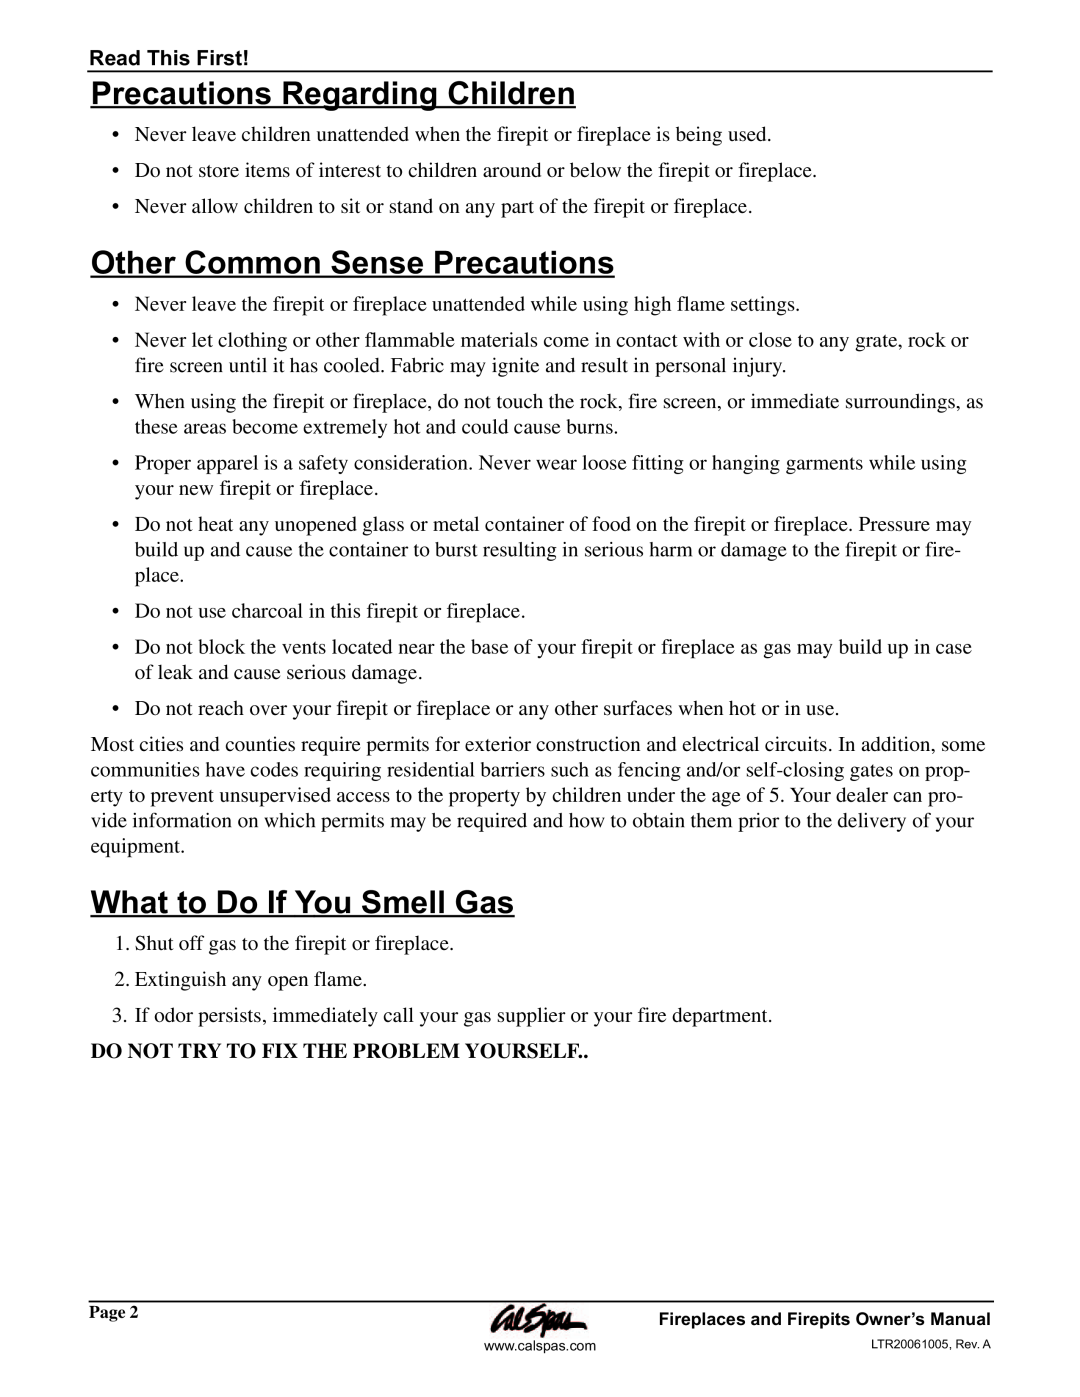 Cal Flame Fireplaces & Firepits 2006 manual Precautions Regarding Children, Other Common Sense Precautions, Read This First 